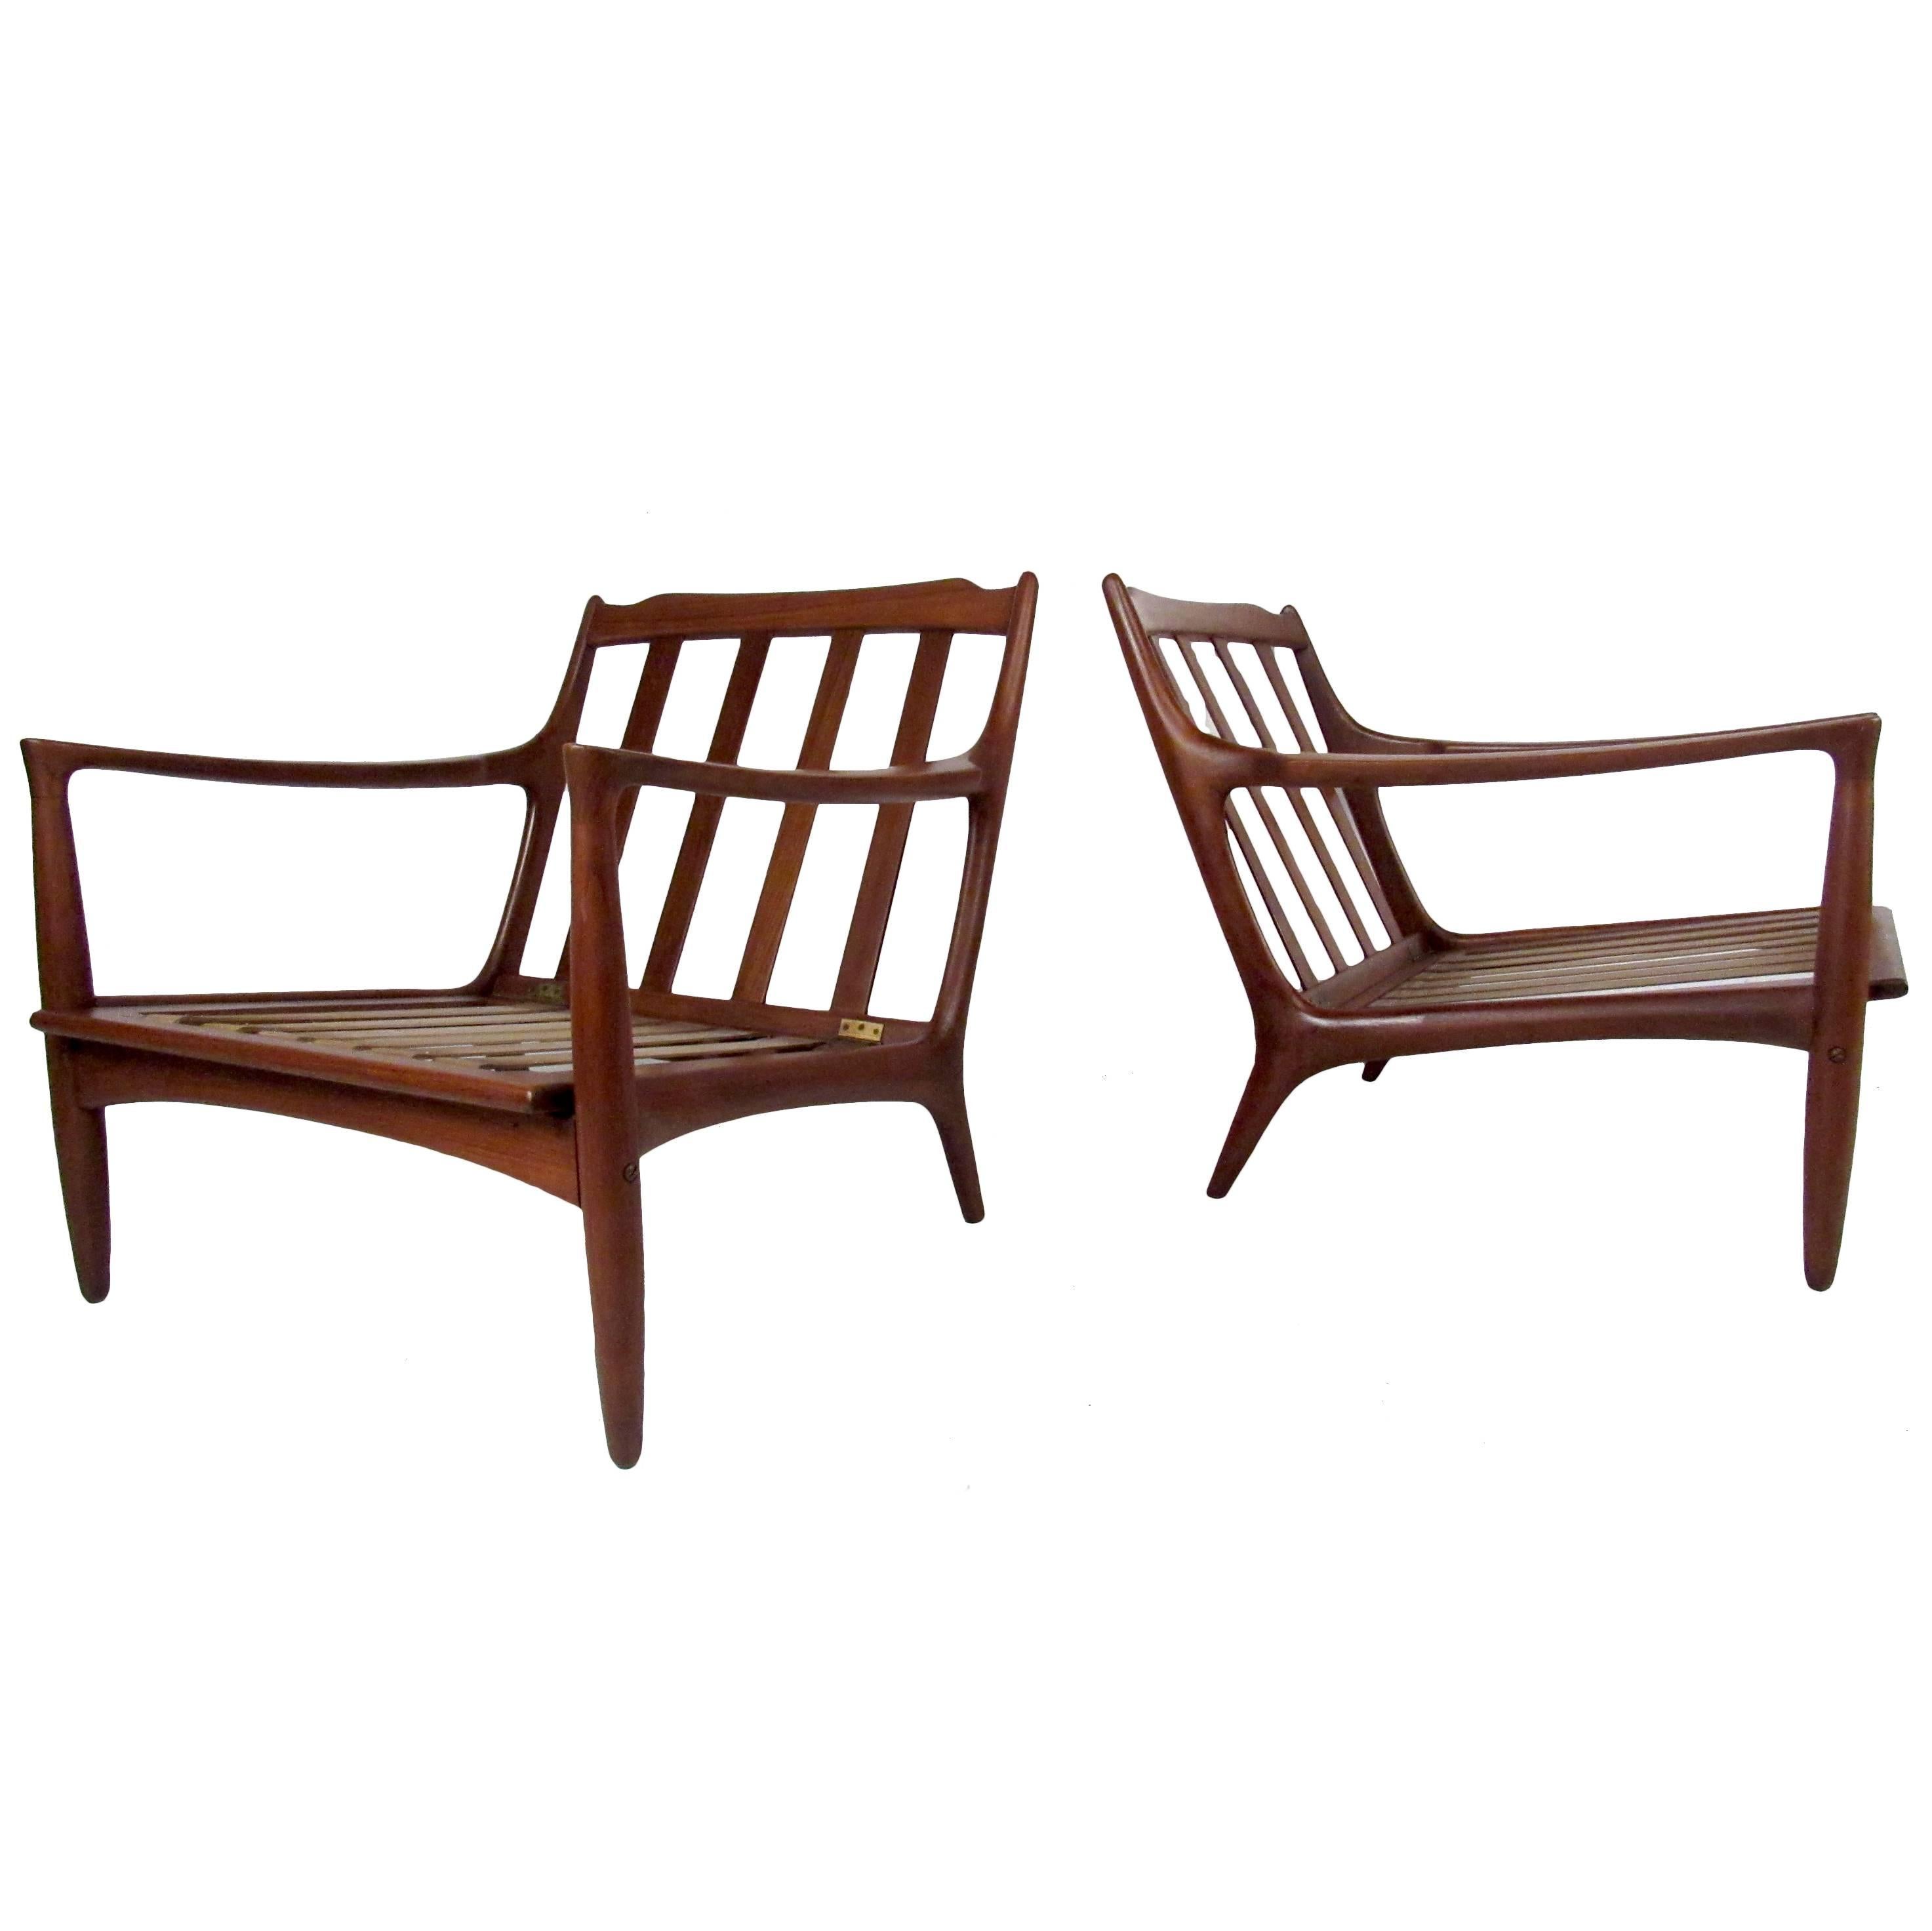 Pair of Sculpted Mid-Century Lounge Chairs